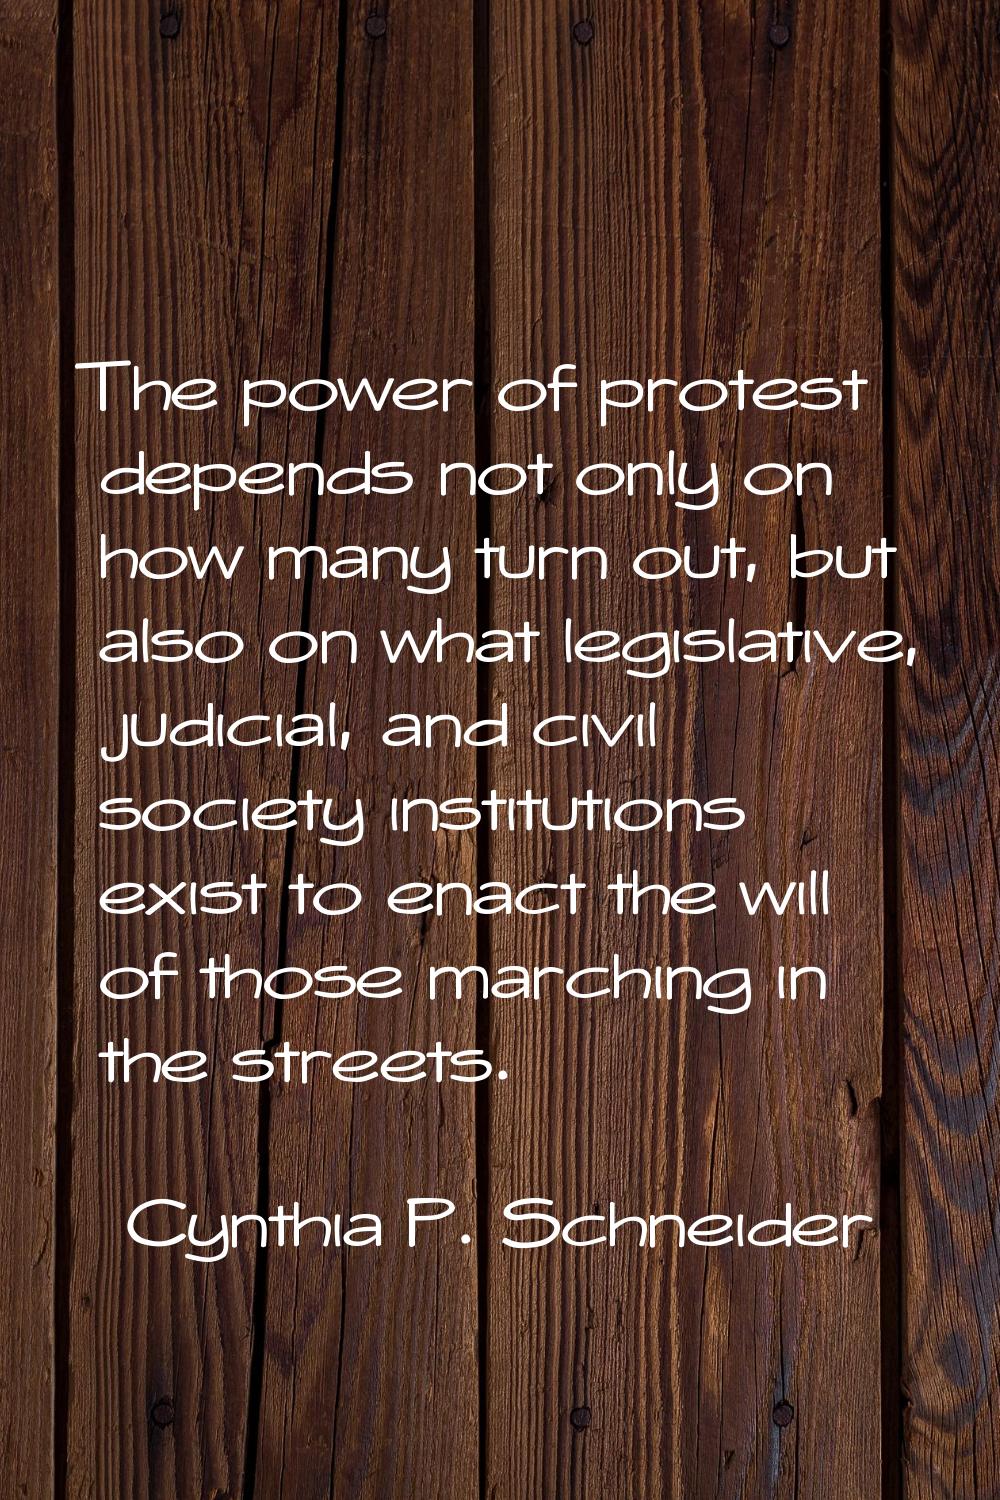 The power of protest depends not only on how many turn out, but also on what legislative, judicial,